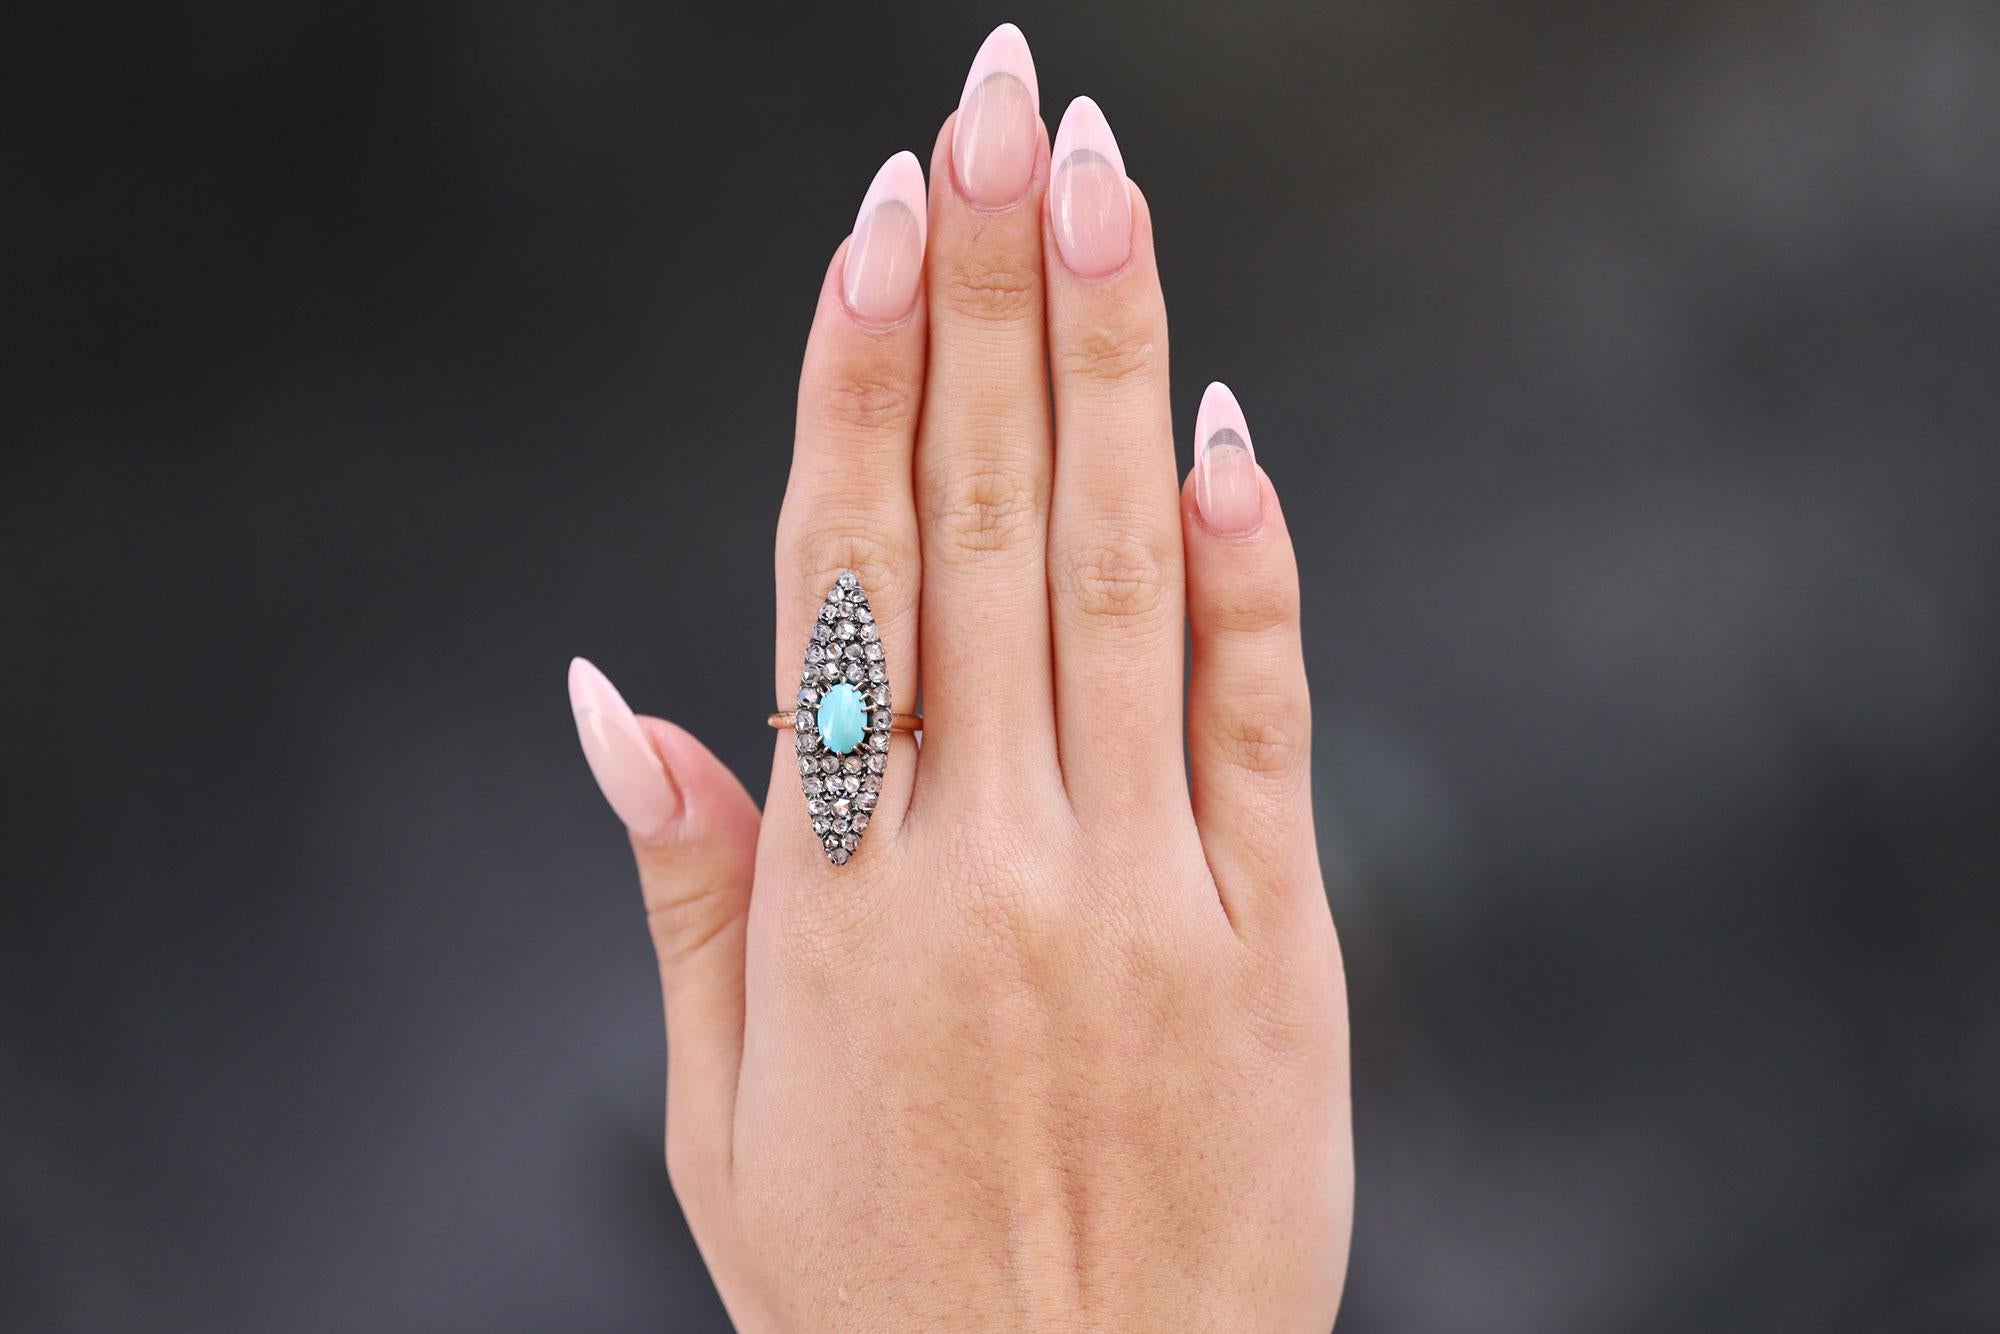 A vivacious Victorian vintage diamond and turquoise navette ring that is long, sleek and slender. This late 19th century stunner is loaded with charm, centered by a striking Persian turquoise of a perfect color and surrounded by 40 twinkling rose